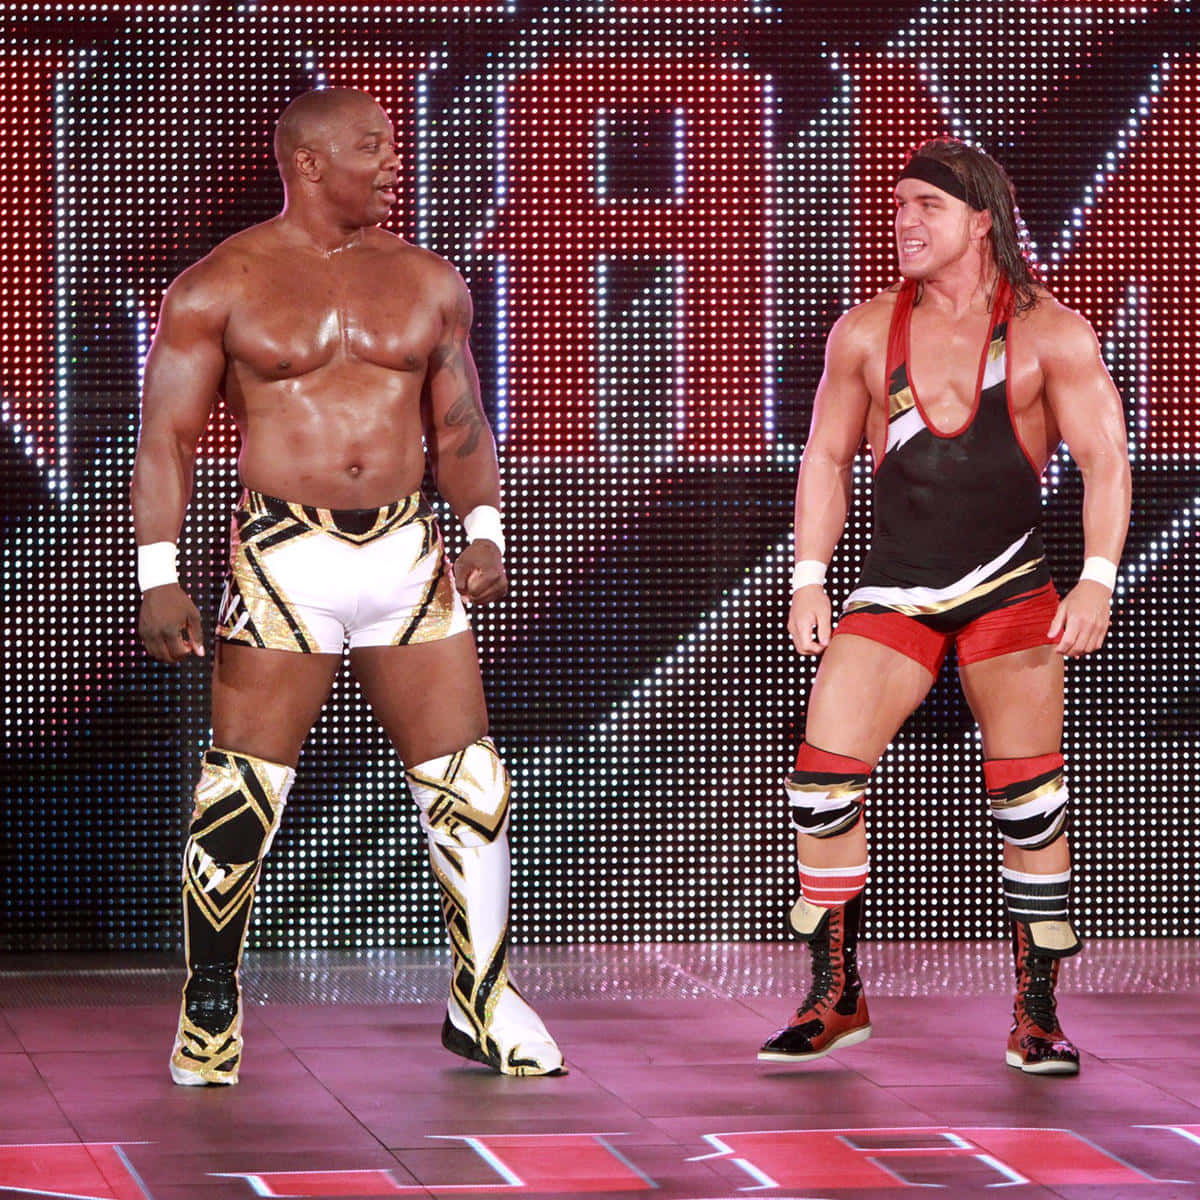 Caption: Wrestling Champions - Shelton Benjamin and Chad Gable against The Ascension Wallpaper